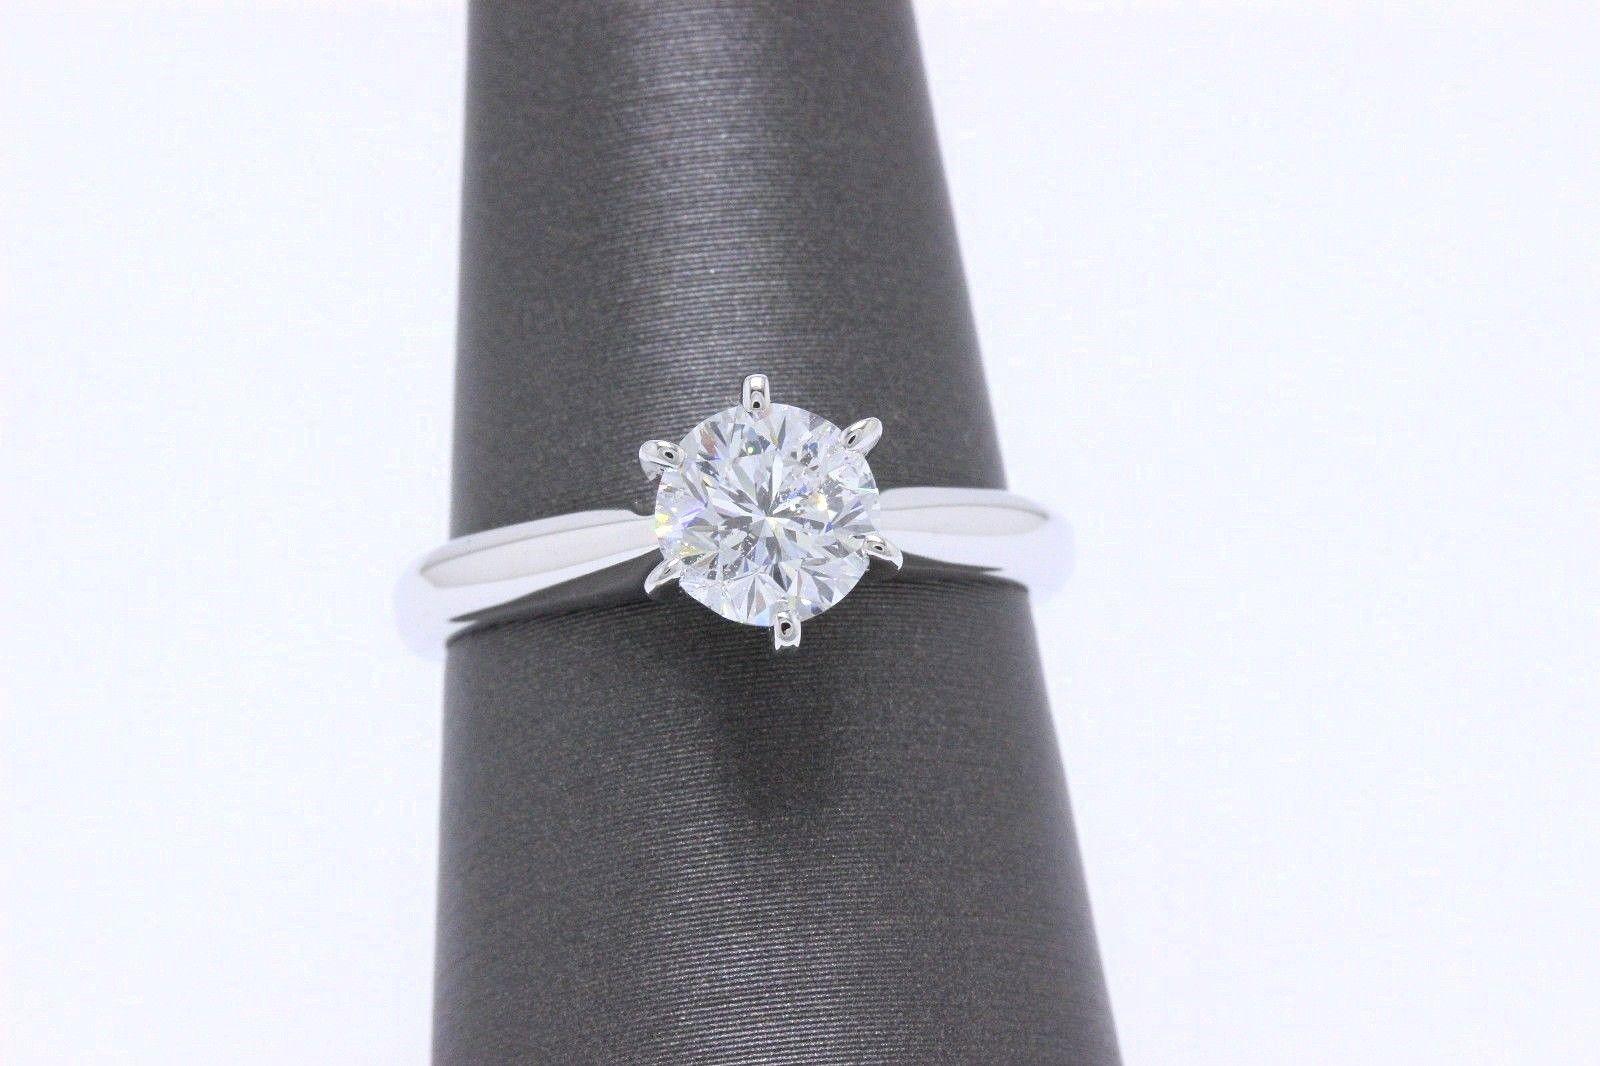 Leo Round Brilliant Diamond Solitaire Engagement Ring 0.97 CT 14KT WG GSI GEMX In Excellent Condition For Sale In San Diego, CA